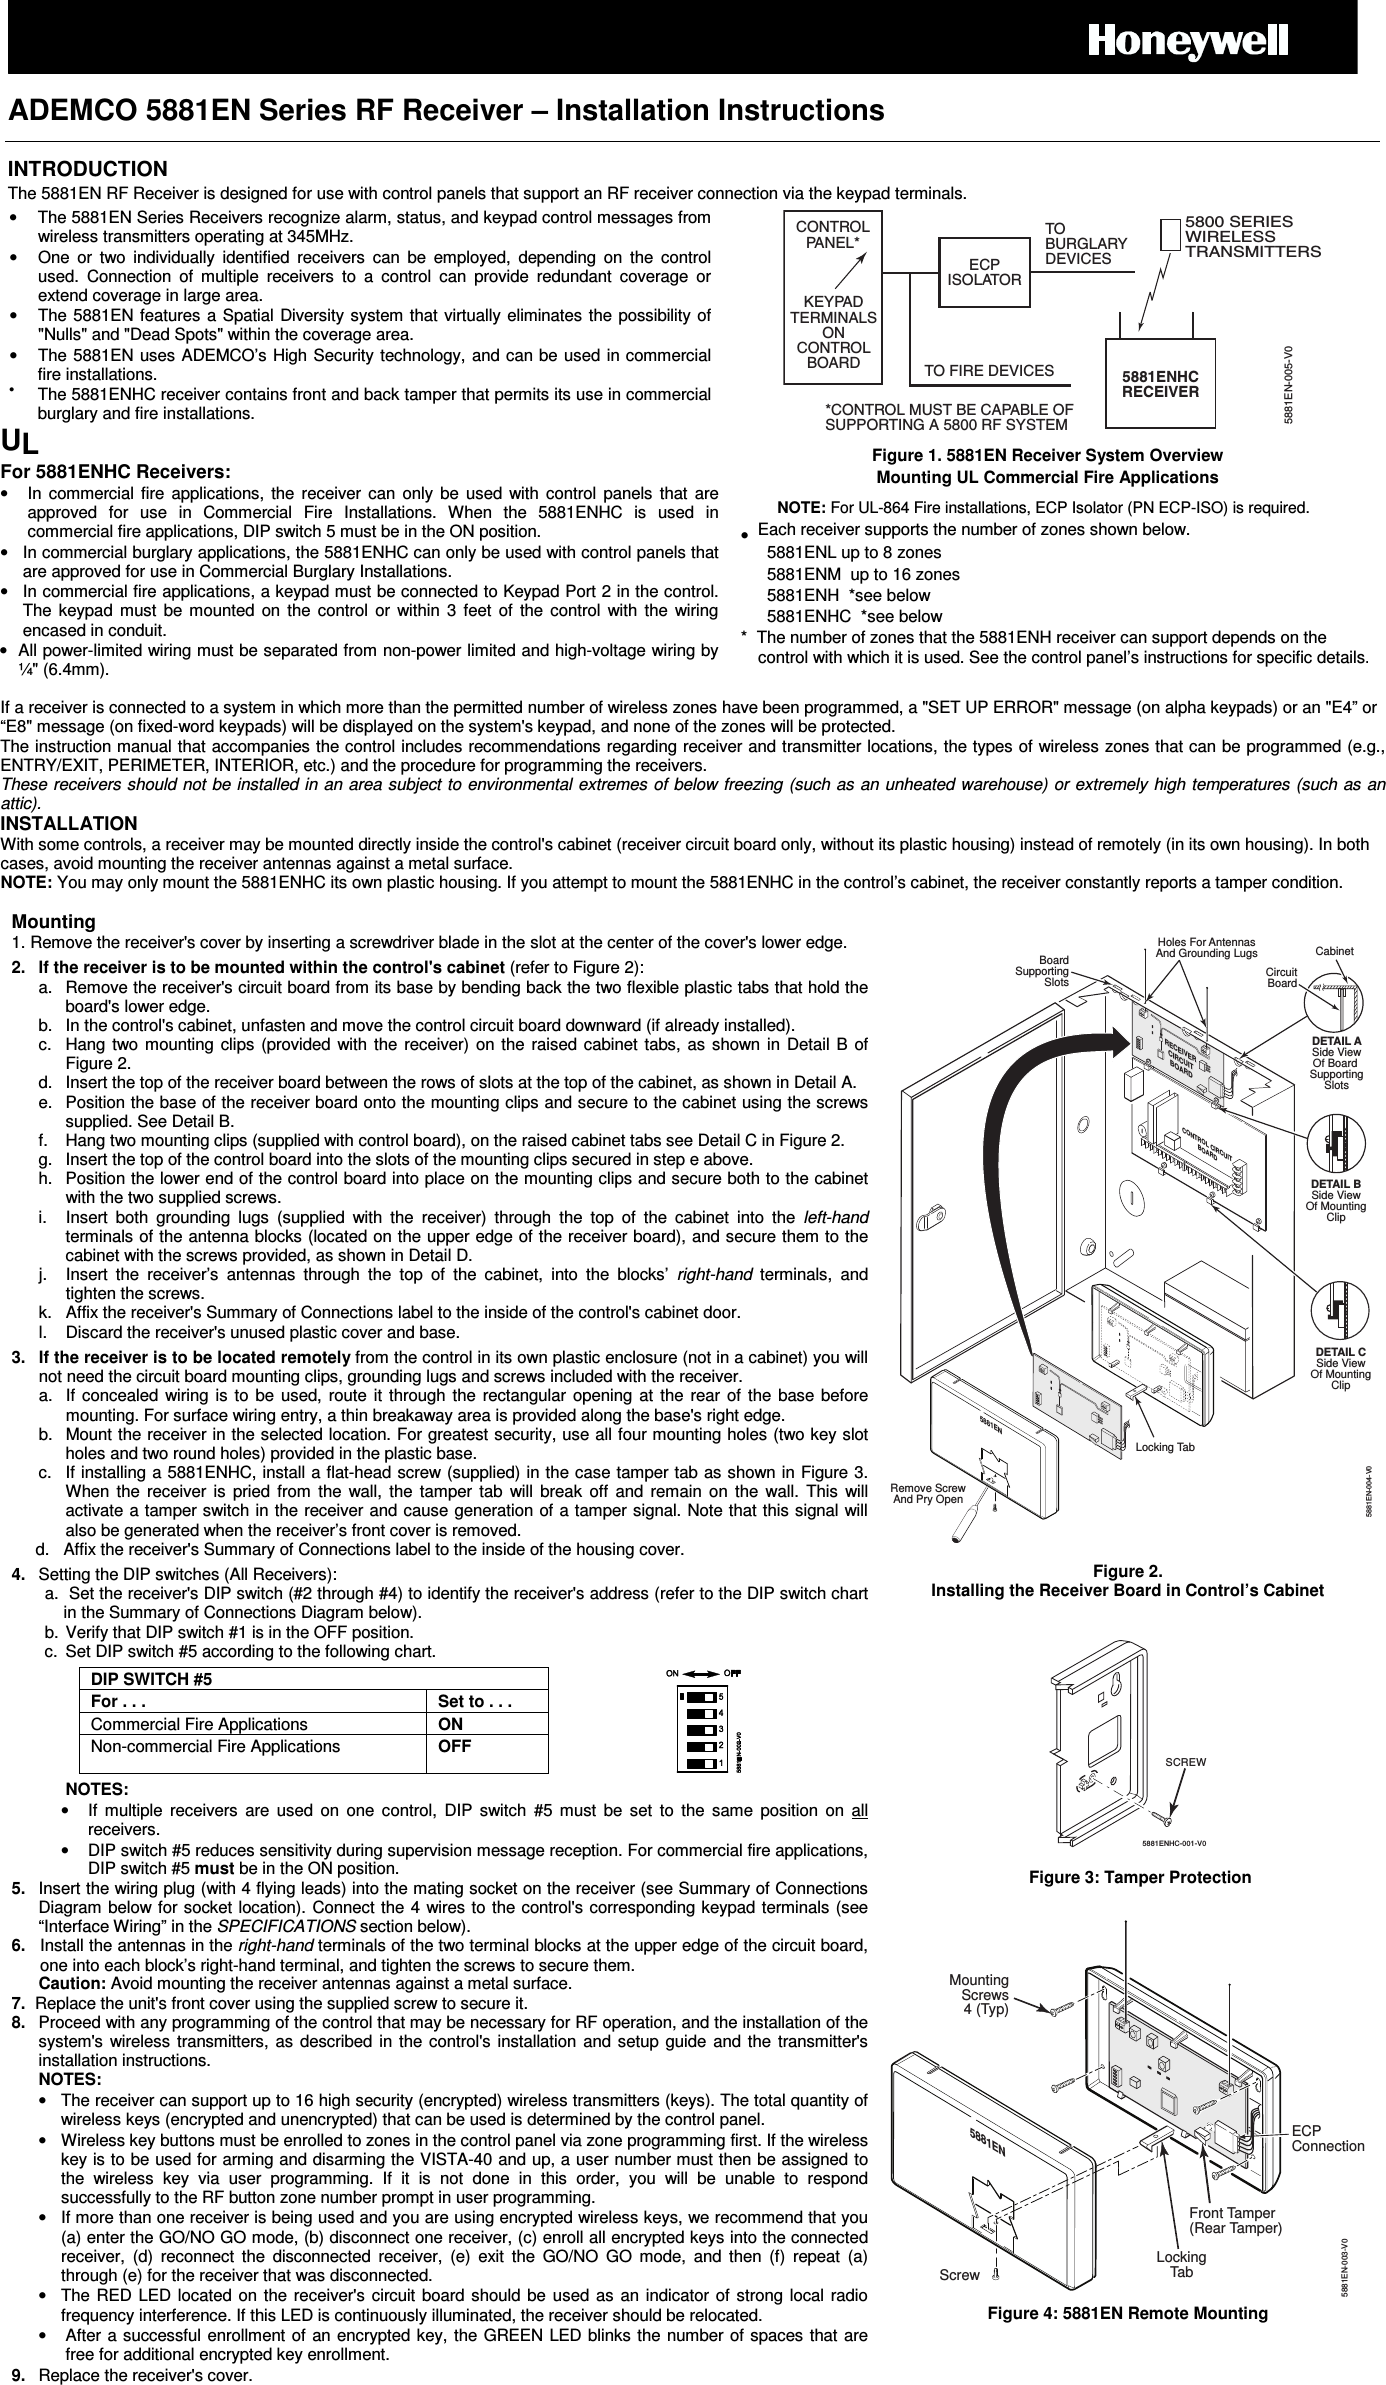   ADEMCO 5881EN Series RF Receiver – Installation Instructions   INTRODUCTION The 5881EN RF Receiver is designed for use with control panels that support an RF receiver connection via the keypad terminals. •  The 5881EN Series Receivers recognize alarm, status, and keypad control messages from wireless transmitters operating at 345MHz.  •  One  or  two  individually  identified  receivers  can  be  employed,  depending  on  the  control used.  Connection  of  multiple  receivers  to  a  control  can  provide  redundant  coverage  or extend coverage in large area. •  The 5881EN features a Spatial Diversity system that virtually eliminates the possibility of &quot;Nulls&quot; and &quot;Dead Spots&quot; within the coverage area. •  The 5881EN uses ADEMCO’s High Security technology, and can be used in commercial fire installations.  •  The 5881ENHC receiver contains front and back tamper that permits its use in commercial burglary and fire installations. UL For 5881ENHC Receivers: •  In  commercial  fire  applications,  the  receiver  can  only  be  used  with  control  panels  that  are approved  for  use  in  Commercial  Fire  Installations.  When  the  5881ENHC  is  used  in commercial fire applications, DIP switch 5 must be in the ON position. •  In commercial burglary applications, the 5881ENHC can only be used with control panels that are approved for use in Commercial Burglary Installations. •  In commercial fire applications, a keypad must be connected to Keypad Port 2 in the control. The  keypad  must  be  mounted  on  the  control  or  within  3  feet  of  the  control  with  the  wiring encased in conduit. •  All power-limited wiring must be separated from non-power limited and high-voltage wiring by ¼&quot; (6.4mm). KEYPADTERMINALSONCONTROLBOARD*CONTROL MUST BE CAPABLE OFSUPPORTING A 5800 RF SYSTEM5881ENHCRECEIVERTOBURGLARYDEVICES5800 SERIESWIRELESSTRANSMITTERS5881EN-005-V0CONTROLPANEL*ECPISOLATORTO FIRE DEVICES Figure 1. 5881EN Receiver System Overview Mounting UL Commercial Fire Applications NOTE: For UL-864 Fire installations, ECP Isolator (PN ECP-ISO) is required. • Each receiver supports the number of zones shown below. 5881ENL up to 8 zones 5881ENM  up to 16 zones 5881ENH  *see below 5881ENHC  *see below *  The number of zones that the 5881ENH receiver can support depends on the control with which it is used. See the control panel’s instructions for specific details. If a receiver is connected to a system in which more than the permitted number of wireless zones have been programmed, a &quot;SET UP ERROR&quot; message (on alpha keypads) or an &quot;E4” or “E8&quot; message (on fixed-word keypads) will be displayed on the system&apos;s keypad, and none of the zones will be protected. The instruction manual that accompanies the control includes recommendations regarding receiver and transmitter locations, the types of wireless zones that can be programmed (e.g., ENTRY/EXIT, PERIMETER, INTERIOR, etc.) and the procedure for programming the receivers. These receivers should not be installed in an area subject to environmental extremes of below freezing (such as an unheated warehouse) or extremely high temperatures (such as an attic). INSTALLATION With some controls, a receiver may be mounted directly inside the control&apos;s cabinet (receiver circuit board only, without its plastic housing) instead of remotely (in its own housing). In both cases, avoid mounting the receiver antennas against a metal surface. NOTE: You may only mount the 5881ENHC its own plastic housing. If you attempt to mount the 5881ENHC in the control’s cabinet, the receiver constantly reports a tamper condition.  Mounting 1. Remove the receiver&apos;s cover by inserting a screwdriver blade in the slot at the center of the cover&apos;s lower edge. 2.  If the receiver is to be mounted within the control&apos;s cabinet (refer to Figure 2): a.  Remove the receiver&apos;s circuit board from its base by bending back the two flexible plastic tabs that hold the board&apos;s lower edge. b.  In the control&apos;s cabinet, unfasten and move the control circuit board downward (if already installed). c.  Hang two  mounting  clips  (provided with  the  receiver)  on the  raised  cabinet tabs,  as  shown  in  Detail B  of Figure 2. d.  Insert the top of the receiver board between the rows of slots at the top of the cabinet, as shown in Detail A. e.  Position the base of the receiver board onto the mounting clips and secure to the cabinet using the screws supplied. See Detail B. f.  Hang two mounting clips (supplied with control board), on the raised cabinet tabs see Detail C in Figure 2. g.  Insert the top of the control board into the slots of the mounting clips secured in step e above. h.  Position the lower end of the control board into place on the mounting clips and secure both to the cabinet with the two supplied screws.  i.  Insert  both  grounding  lugs  (supplied  with  the  receiver)  through  the  top  of  the  cabinet  into  the  left-hand terminals of the antenna blocks (located on the upper edge of the receiver board), and secure them to the cabinet with the screws provided, as shown in Detail D. j.  Insert  the  receiver’s  antennas  through  the  top  of  the  cabinet,  into  the  blocks’  right-hand  terminals,  and tighten the screws. k.  Affix the receiver&apos;s Summary of Connections label to the inside of the control&apos;s cabinet door. l.  Discard the receiver&apos;s unused plastic cover and base. 3.  If the receiver is to be located remotely from the control in its own plastic enclosure (not in a cabinet) you will not need the circuit board mounting clips, grounding lugs and screws included with the receiver. a.  If  concealed  wiring  is  to  be  used,  route  it  through the  rectangular opening  at  the  rear  of  the  base  before mounting. For surface wiring entry, a thin breakaway area is provided along the base&apos;s right edge. b.  Mount the receiver in the selected location. For greatest security, use all four mounting holes (two key slot holes and two round holes) provided in the plastic base.  c.  If installing a 5881ENHC, install a flat-head screw (supplied) in the case tamper tab as shown in Figure 3. When  the  receiver  is  pried  from  the  wall,  the  tamper  tab  will  break  off  and  remain  on  the  wall.  This  will activate a tamper switch in the receiver and cause generation of a tamper signal. Note that this signal will also be generated when the receiver’s front cover is removed. d.   Affix the receiver&apos;s Summary of Connections label to the inside of the housing cover. 4.  Setting the DIP switches (All Receivers):  a.  Set the receiver&apos;s DIP switch (#2 through #4) to identify the receiver&apos;s address (refer to the DIP switch chart in the Summary of Connections Diagram below). b.  Verify that DIP switch #1 is in the OFF position. c.  Set DIP switch #5 according to the following chart. DIP SWITCH #5  For . . .  Set to . . . Commercial Fire Applications  ON Non-commercial Fire Applications  OFF NOTES: •  If  multiple  receivers  are  used  on  one  control,  DIP  switch  #5  must  be  set  to  the  same  position  on  all receivers. •  DIP switch #5 reduces sensitivity during supervision message reception. For commercial fire applications, DIP switch #5 must be in the ON position. 5.  Insert the wiring plug (with 4 flying leads) into the mating socket on the receiver (see Summary of Connections Diagram below for socket location). Connect the 4 wires to  the control&apos;s corresponding keypad terminals (see “Interface Wiring” in the SPECIFICATIONS section below). 6.  Install the antennas in the right-hand terminals of the two terminal blocks at the upper edge of the circuit board, one into each block’s right-hand terminal, and tighten the screws to secure them.   Caution: Avoid mounting the receiver antennas against a metal surface. 7.  Replace the unit&apos;s front cover using the supplied screw to secure it. 8.  Proceed with any programming of the control that may be necessary for RF operation, and the installation of the system&apos;s  wireless  transmitters, as  described in  the  control&apos;s  installation and  setup  guide  and  the  transmitter&apos;s installation instructions.  NOTES: •  The receiver can support up to 16 high security (encrypted) wireless transmitters (keys). The total quantity of wireless keys (encrypted and unencrypted) that can be used is determined by the control panel. •  Wireless key buttons must be enrolled to zones in the control panel via zone programming first. If the wireless key is to be used for arming and disarming the VISTA-40 and up, a user number must then be assigned to the  wireless  key  via  user  programming.  If  it  is  not  done  in  this  order,  you  will  be  unable  to  respond successfully to the RF button zone number prompt in user programming. •  If more than one receiver is being used and you are using encrypted wireless keys, we recommend that you (a) enter the GO/NO GO mode, (b) disconnect one receiver, (c) enroll all encrypted keys into the connected receiver,  (d)  reconnect  the  disconnected  receiver,  (e)  exit  the  GO/NO  GO  mode,  and  then  (f)  repeat  (a) through (e) for the receiver that was disconnected.  •  The RED  LED  located  on  the  receiver&apos;s circuit  board  should  be  used  as  an  indicator of  strong  local  radio frequency interference. If this LED is continuously illuminated, the receiver should be relocated. •  After a successful enrollment of  an encrypted key, the GREEN LED blinks the  number of spaces that are free for additional encrypted key enrollment. 9.  Replace the receiver&apos;s cover. Remove ScrewAnd Pry OpenRECEIVERCIRCUITBOARDBoardSupportingSlotsHoles For AntennasAnd Grounding LugsDETAIL BSide ViewOf MountingClipDETAIL CSide ViewOf MountingClipDETAIL ASide ViewOf Board SupportingSlotsCircuitBoardCabinetCONTROL CIRCUITBOARD5881ENLocking Tab5881EN-004-V0 Figure 2. Installing the Receiver Board in Control’s Cabinet   5881ENHC-001-V0SCREW Figure 3: Tamper Protection  Screw5881ENLockingTab5881EN-003-V0MountingScrews4 (Typ)ECPConnectionFront Tamper(Rear Tamper) Figure 4: 5881EN Remote Mounting 